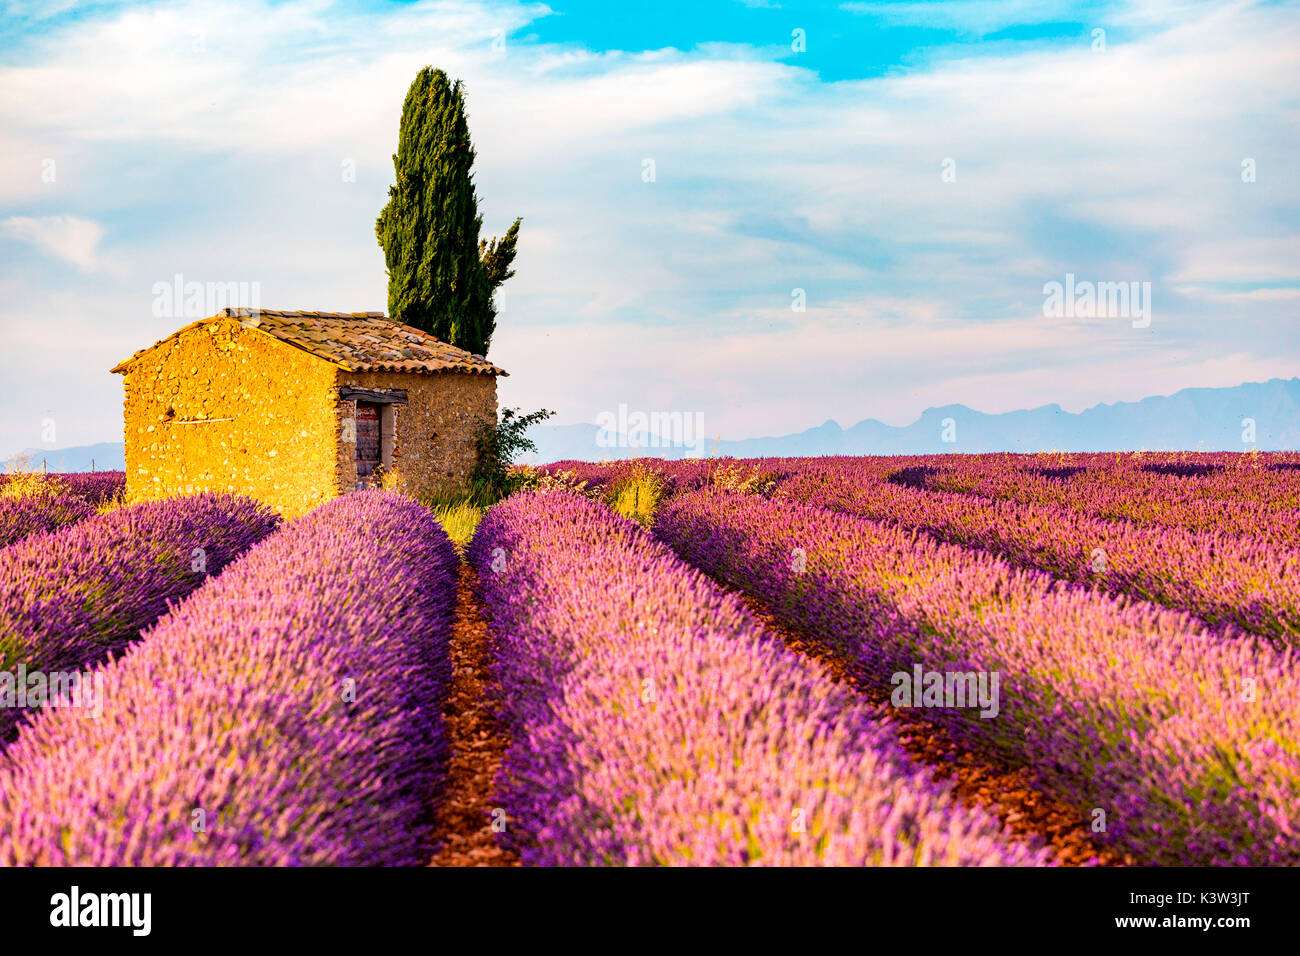 Provence, Valensole Plateau, France, Europe. Lonely farmhouse and cypress tree in a Lavender field in bloom, sunrise with sunburst. Stock Photo